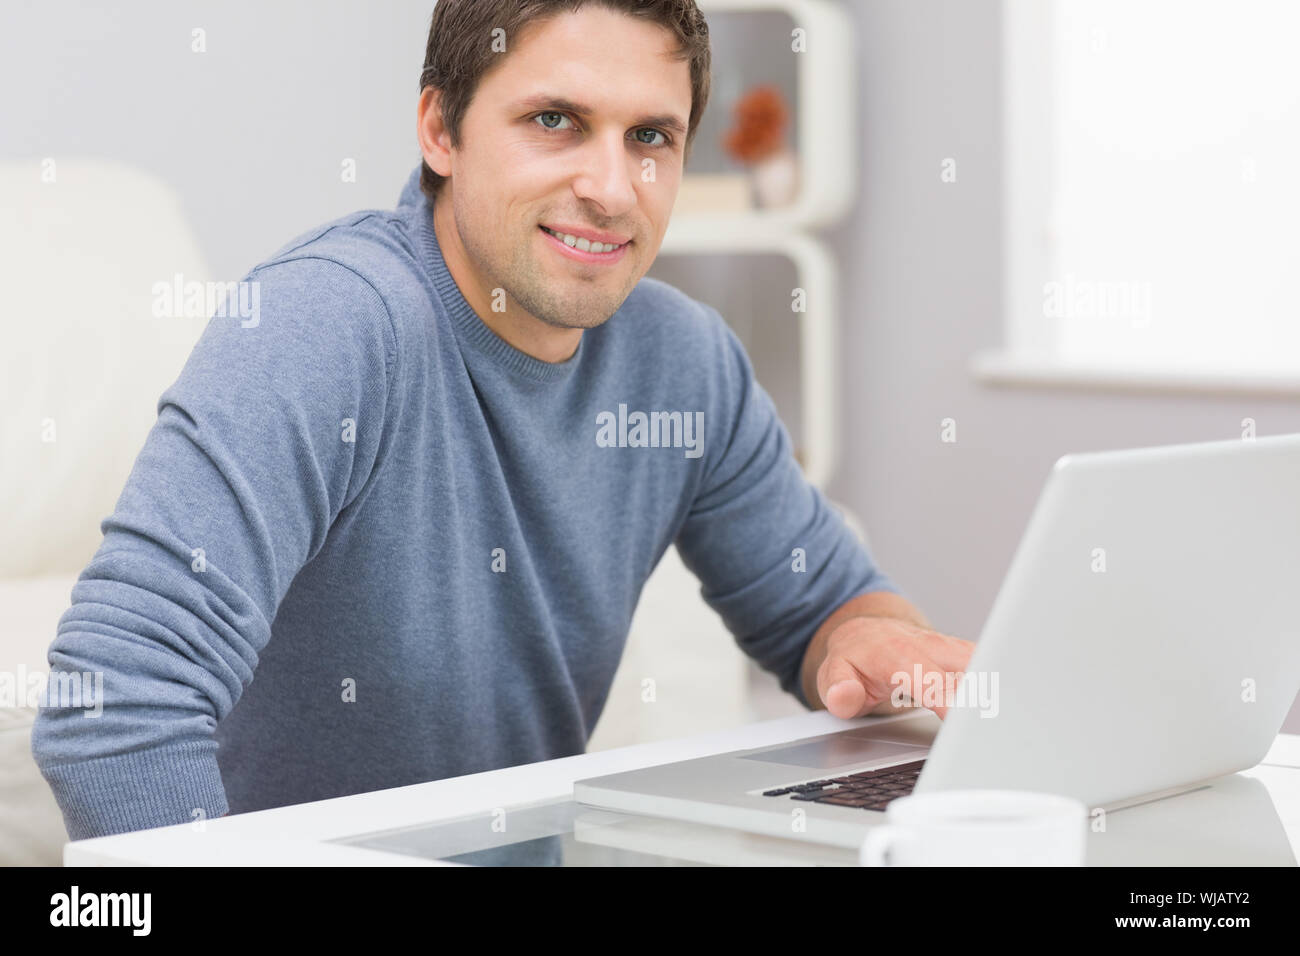 Portrait of smiling man using laptop in living room Stock Photo